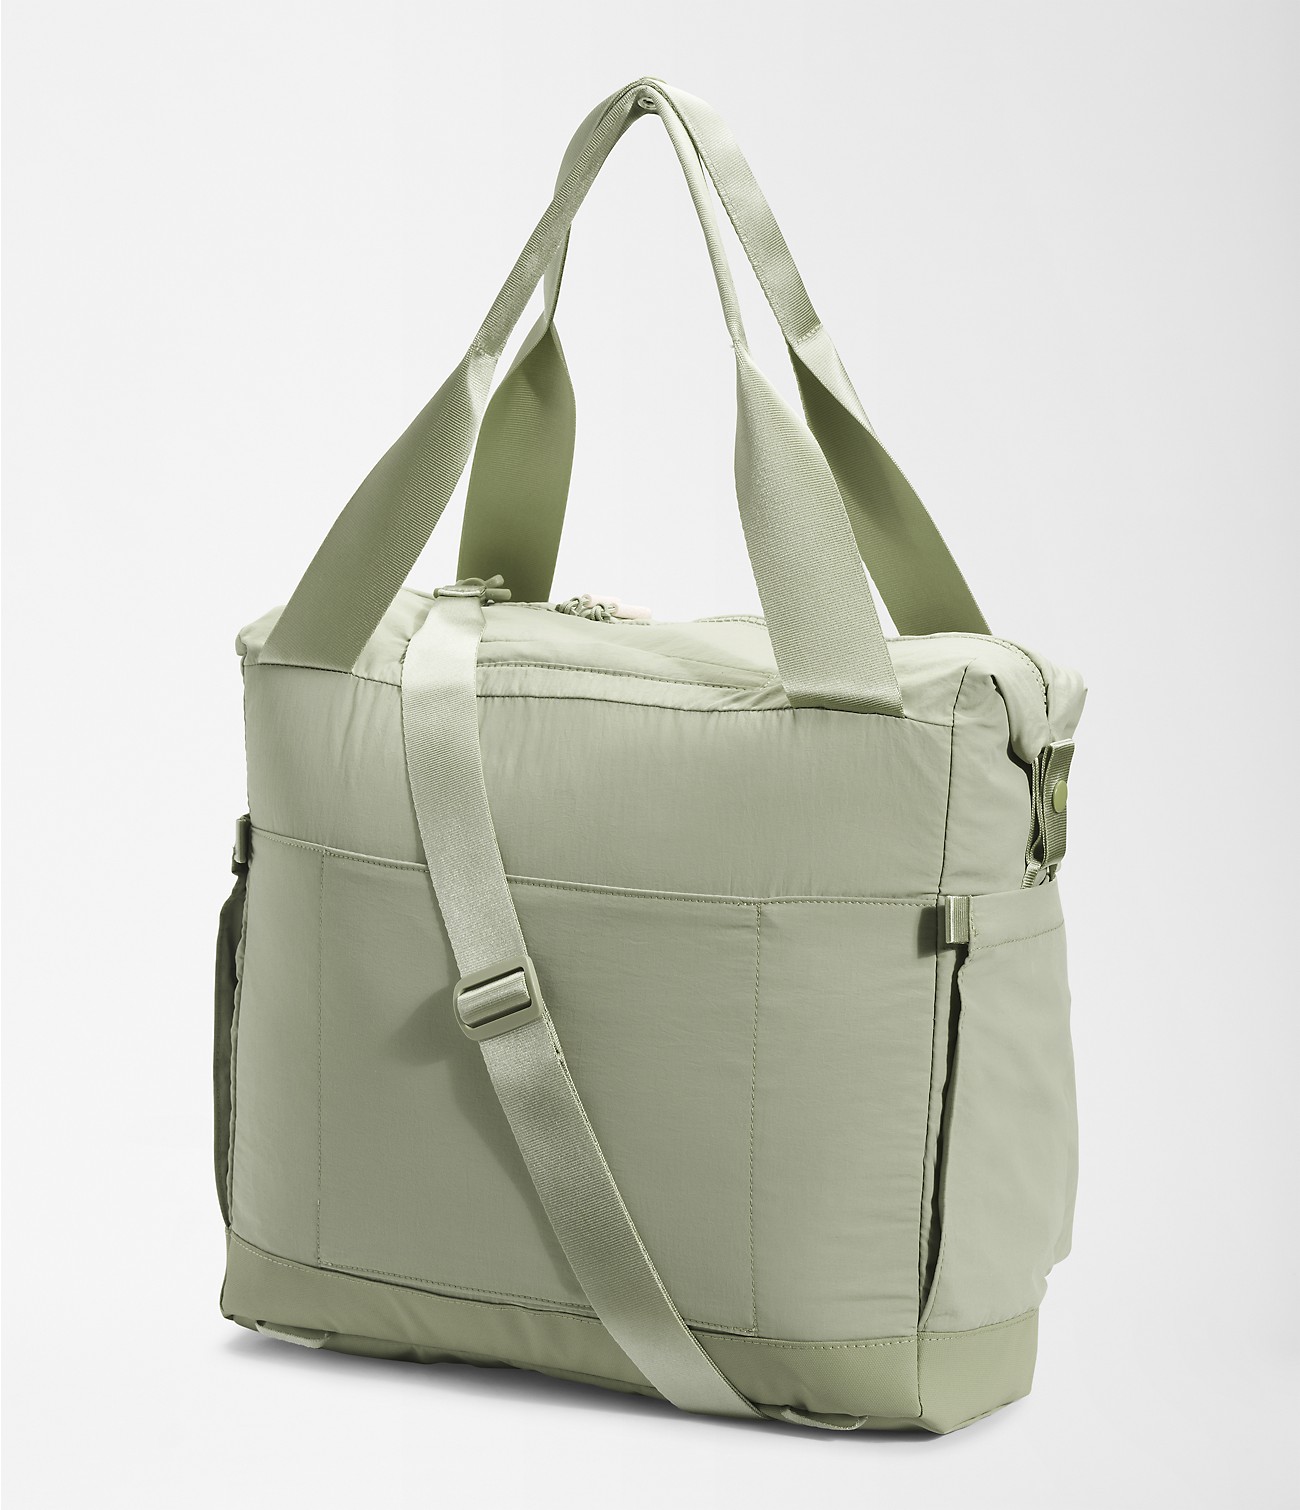 Women’s Never Stop Tote | The North Face